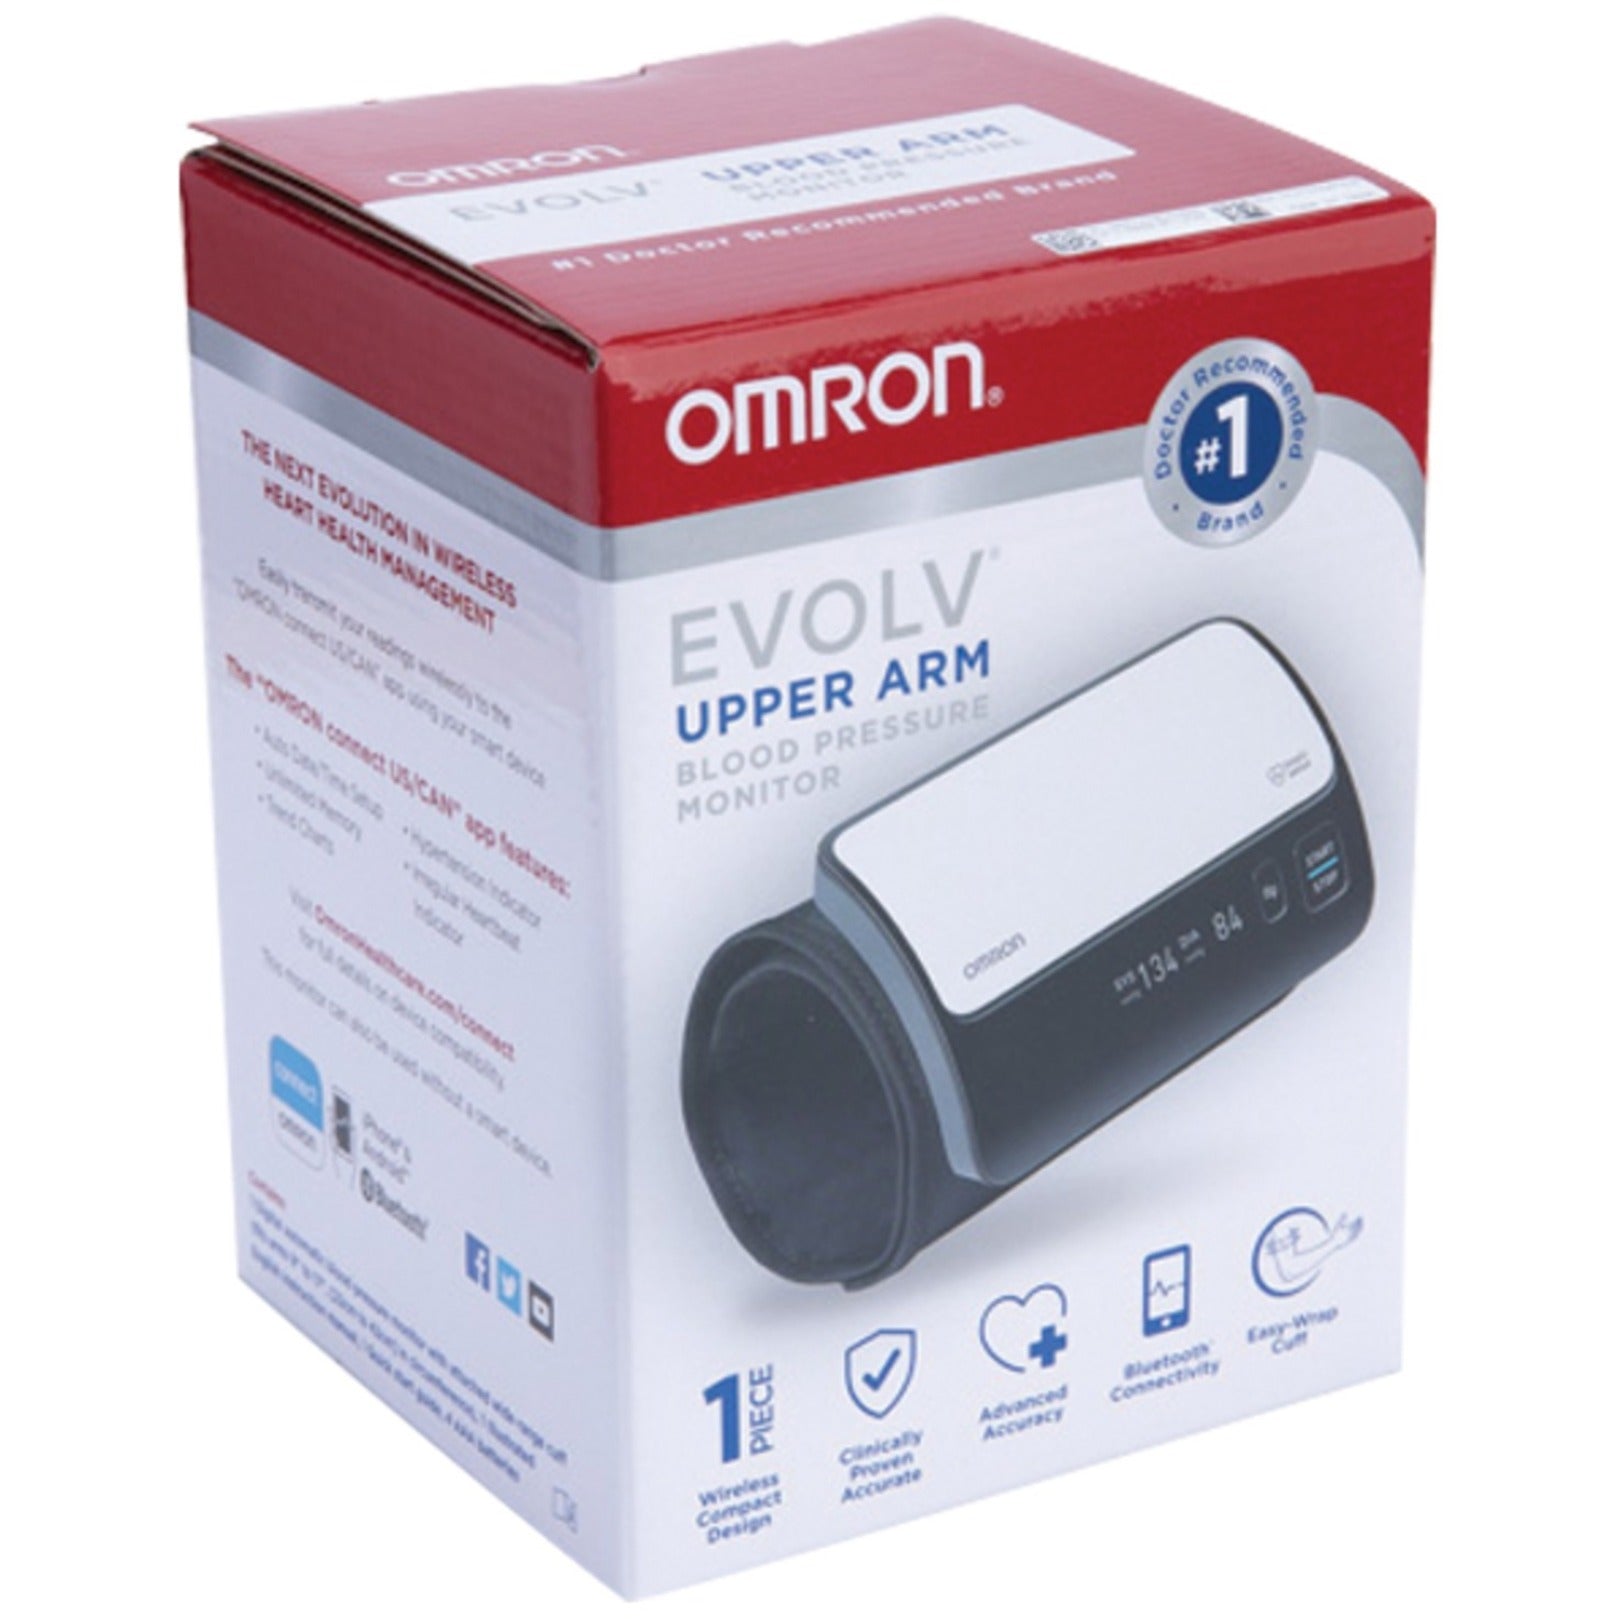 Omron BP7000 Evolv Wireless Upper Arm Blood Pressure Monitor, Clinically Validated, Bluetooth Connectivity